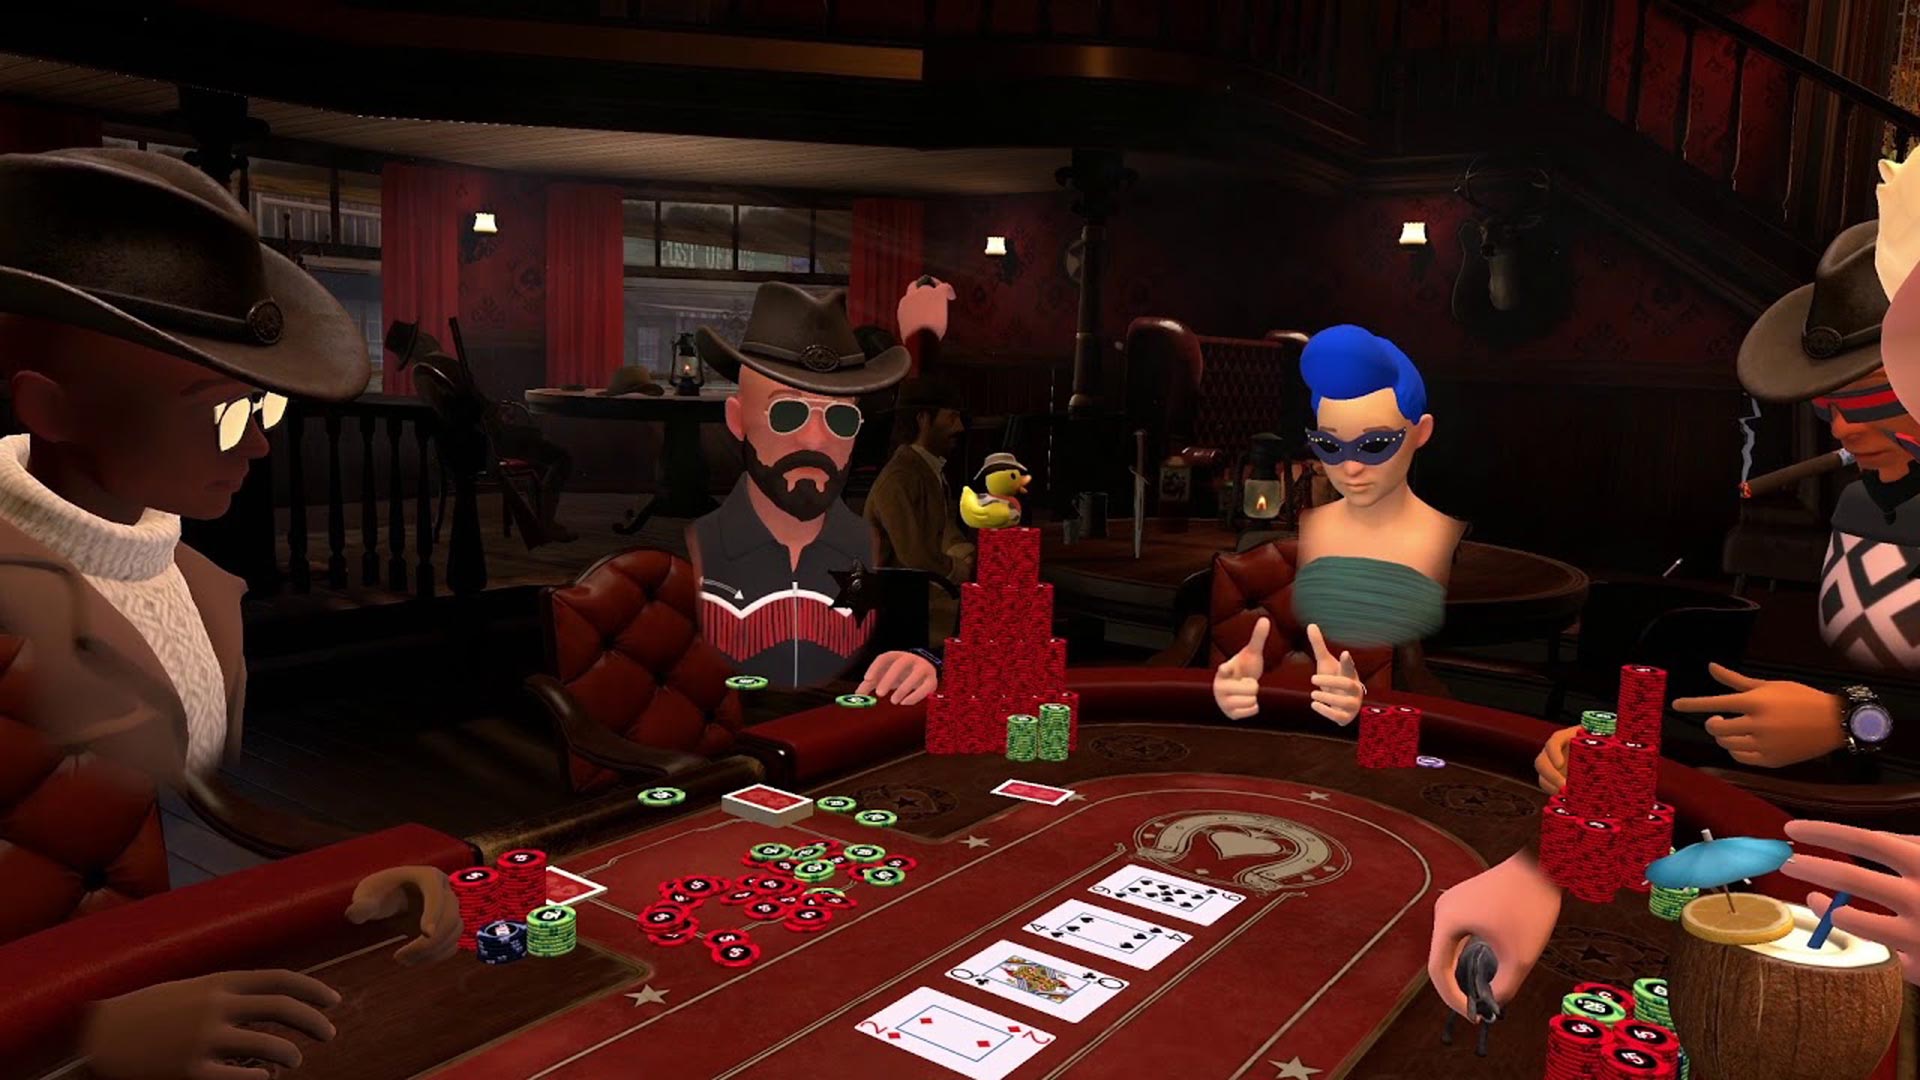 PokerStars VR Launches Worldwide on Multiple Platforms to Rave Reviews